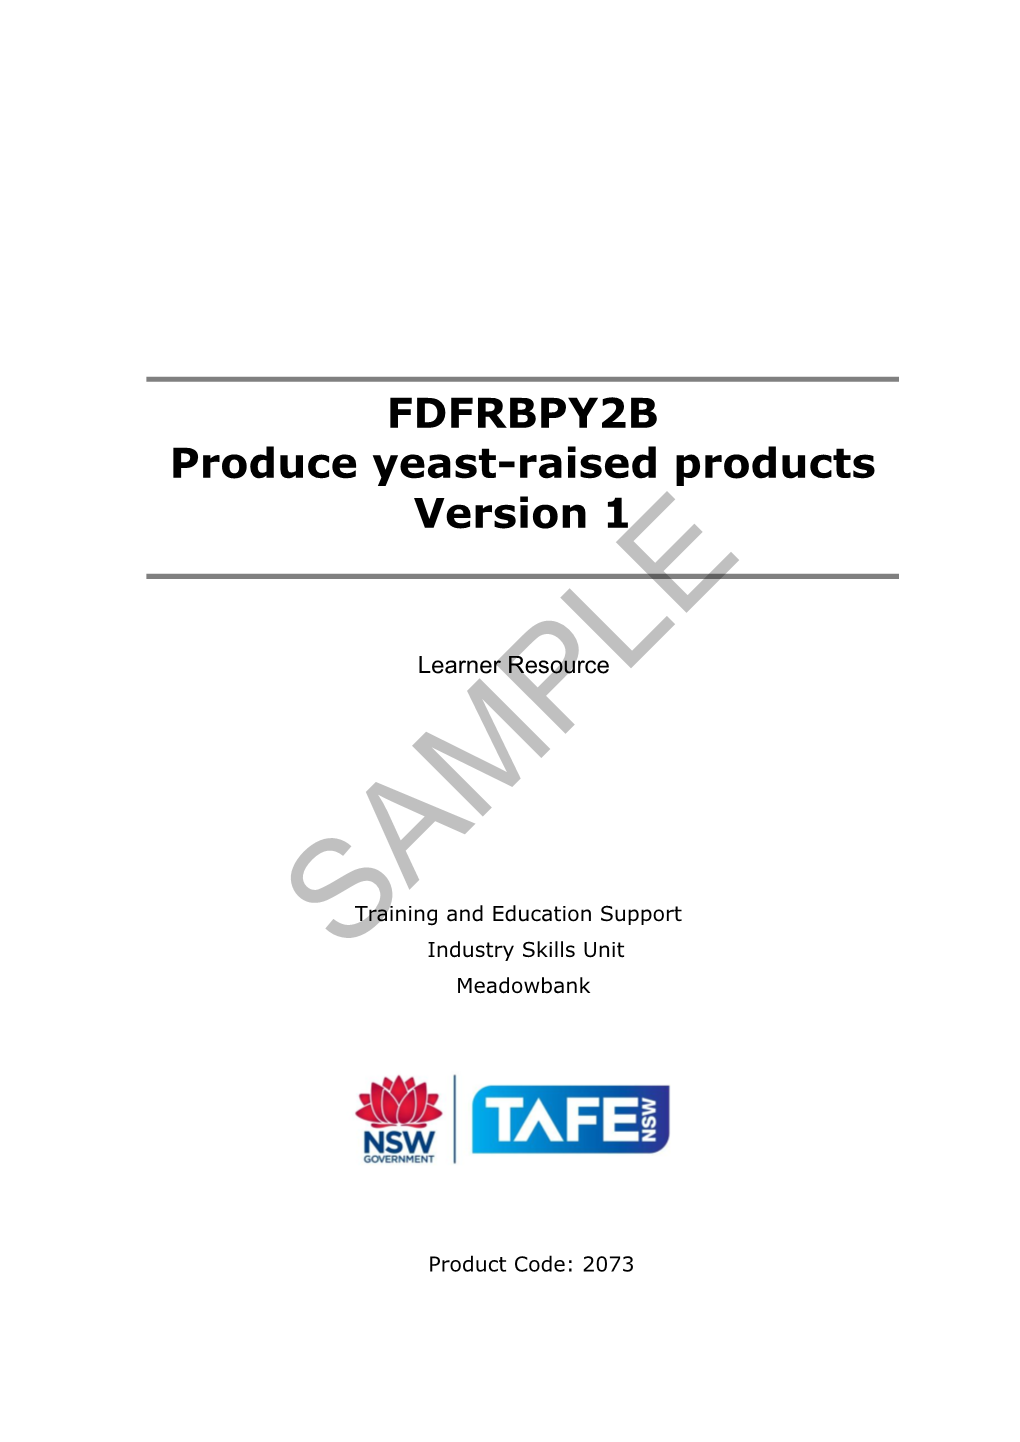 FDFRBPY2B Produce Yeast-Raised Products Version 1